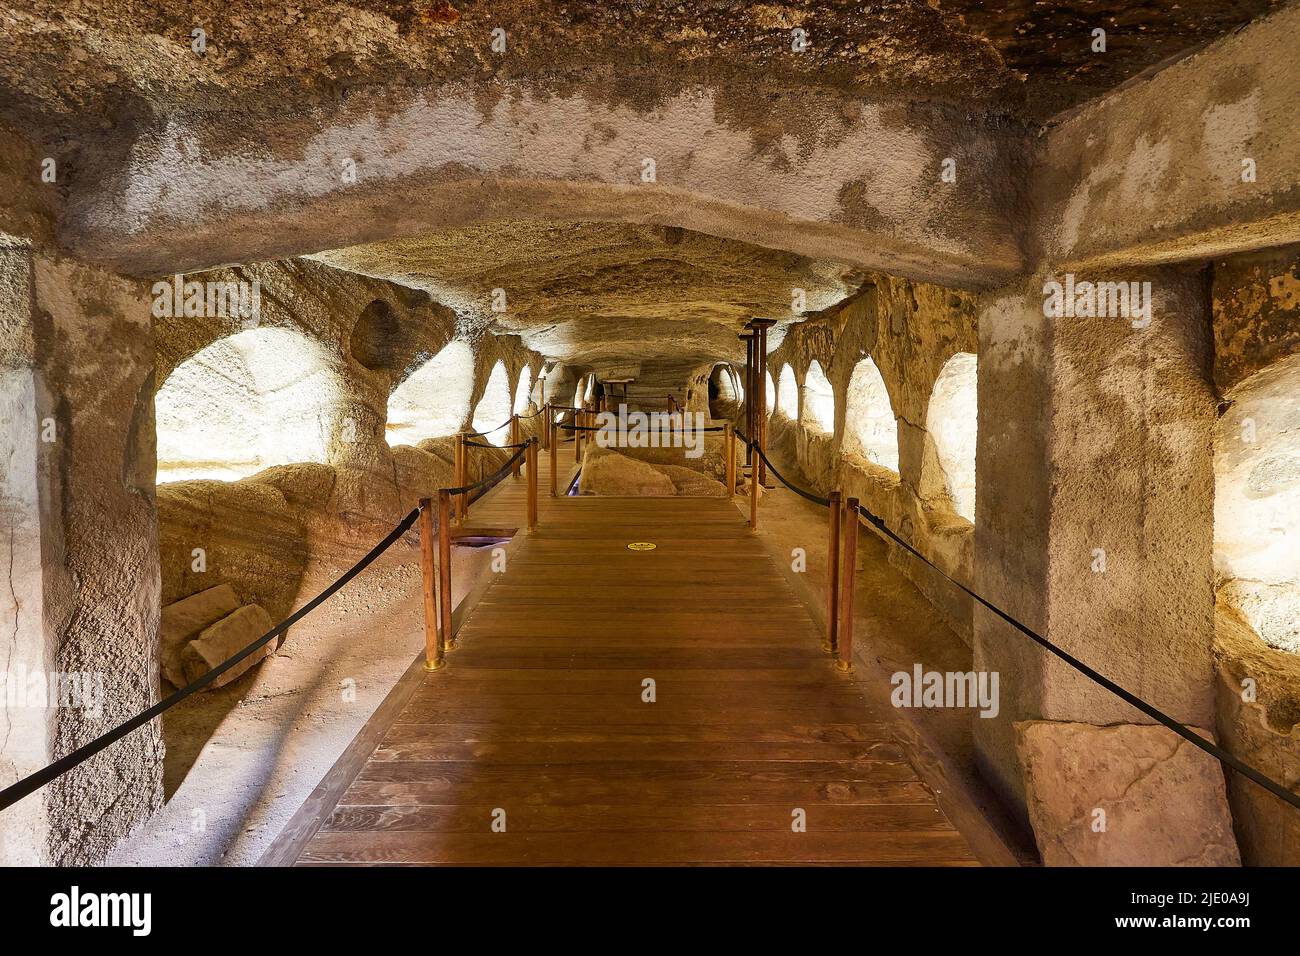 Milou Catacombs, Catacombs, Lava Caves, Tuff Rock, Tuff Caves, Early Christian Tombs, Wooden Walkway, Burial Chambers, Milos Island, Cyclades, Greece Stock Photo